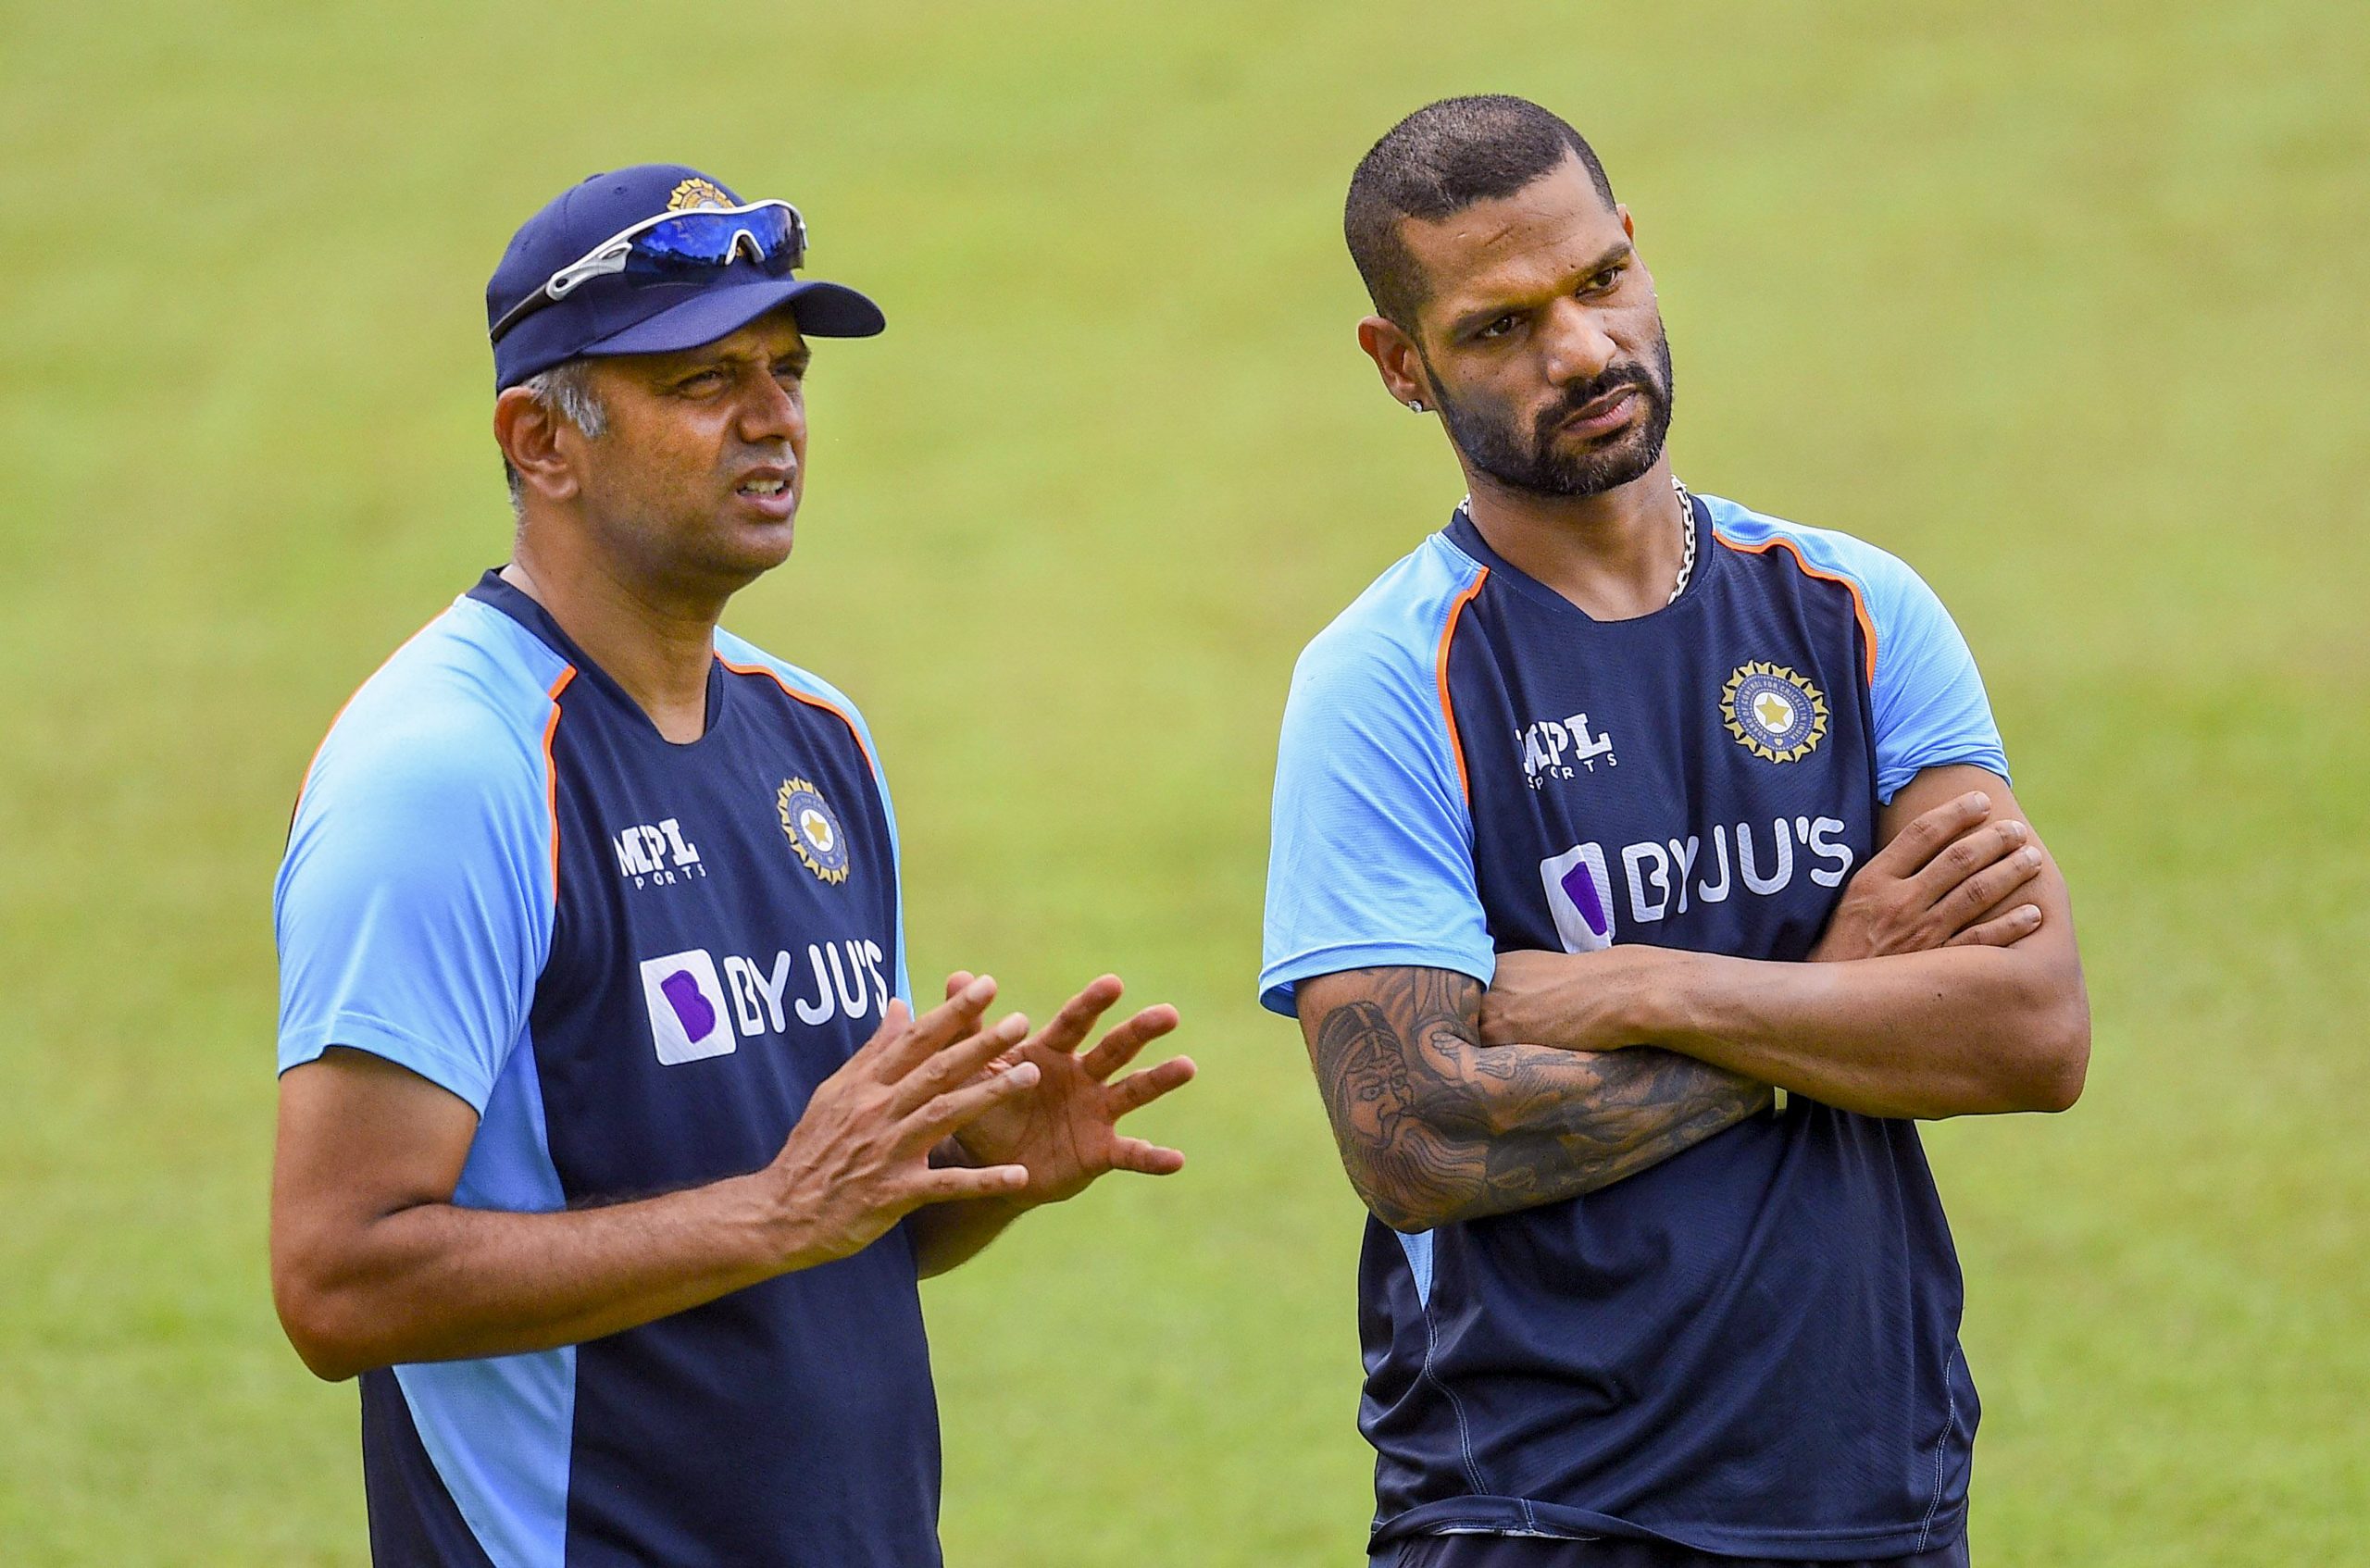 Ind vs WI, 1st ODI: Shikhar Dhawan says Indian youngsters will get much needed exposure